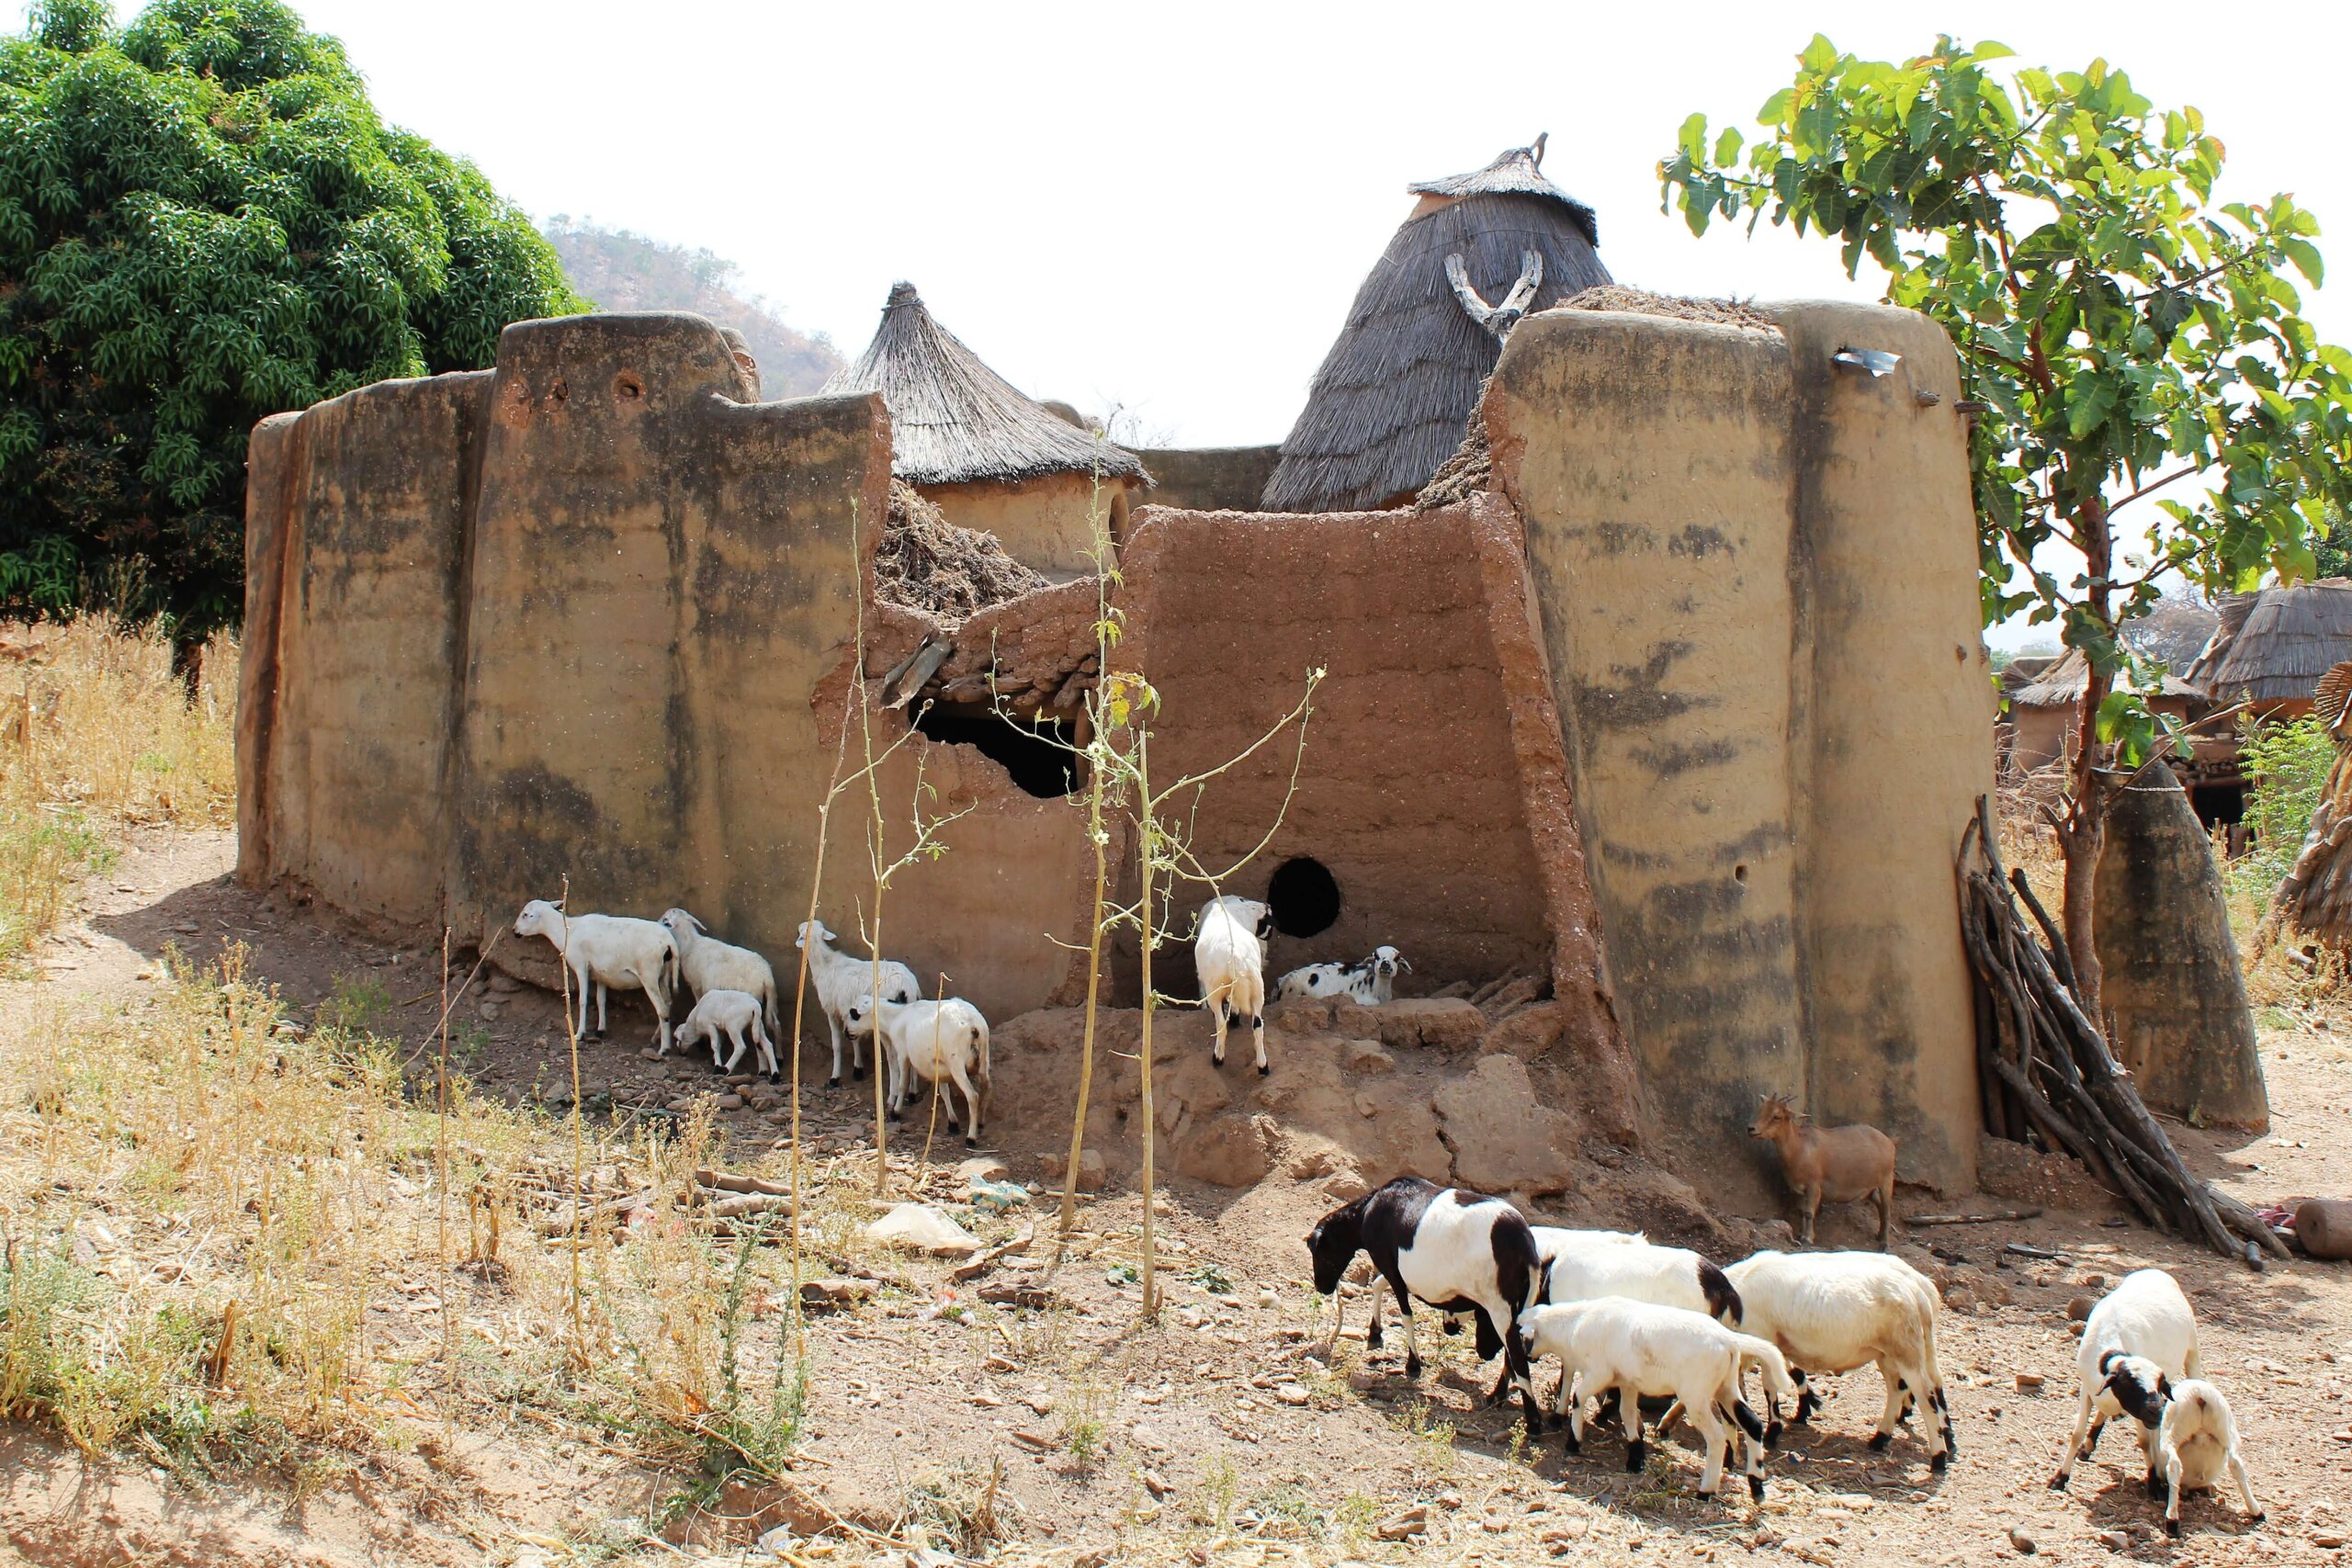 This picture shows a traditional tata Somba with goats running around in front of it